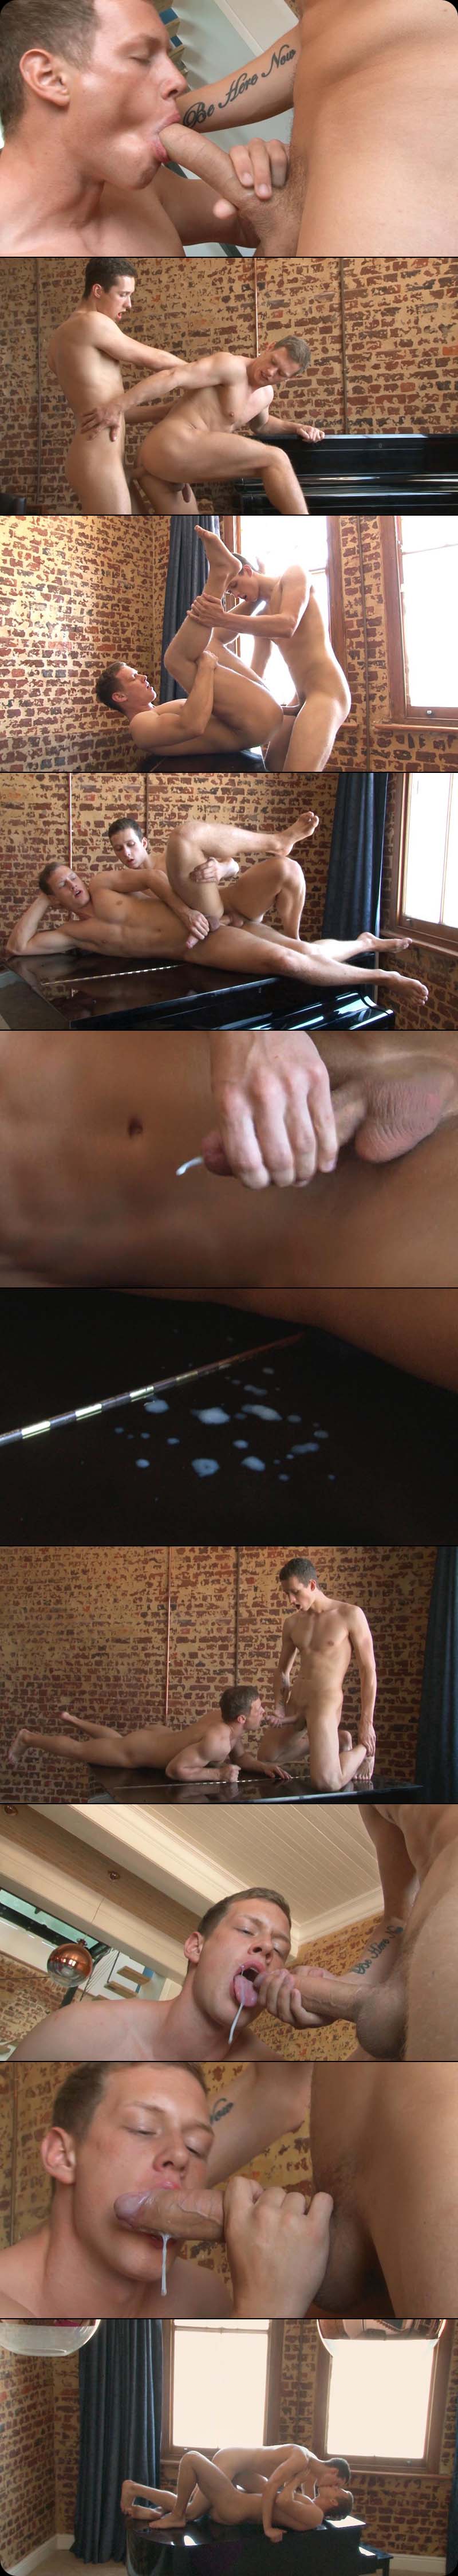 Africa Flashbacks, Part One (Brian Jovovich and Raf Koons) at BelAmiOnline.com